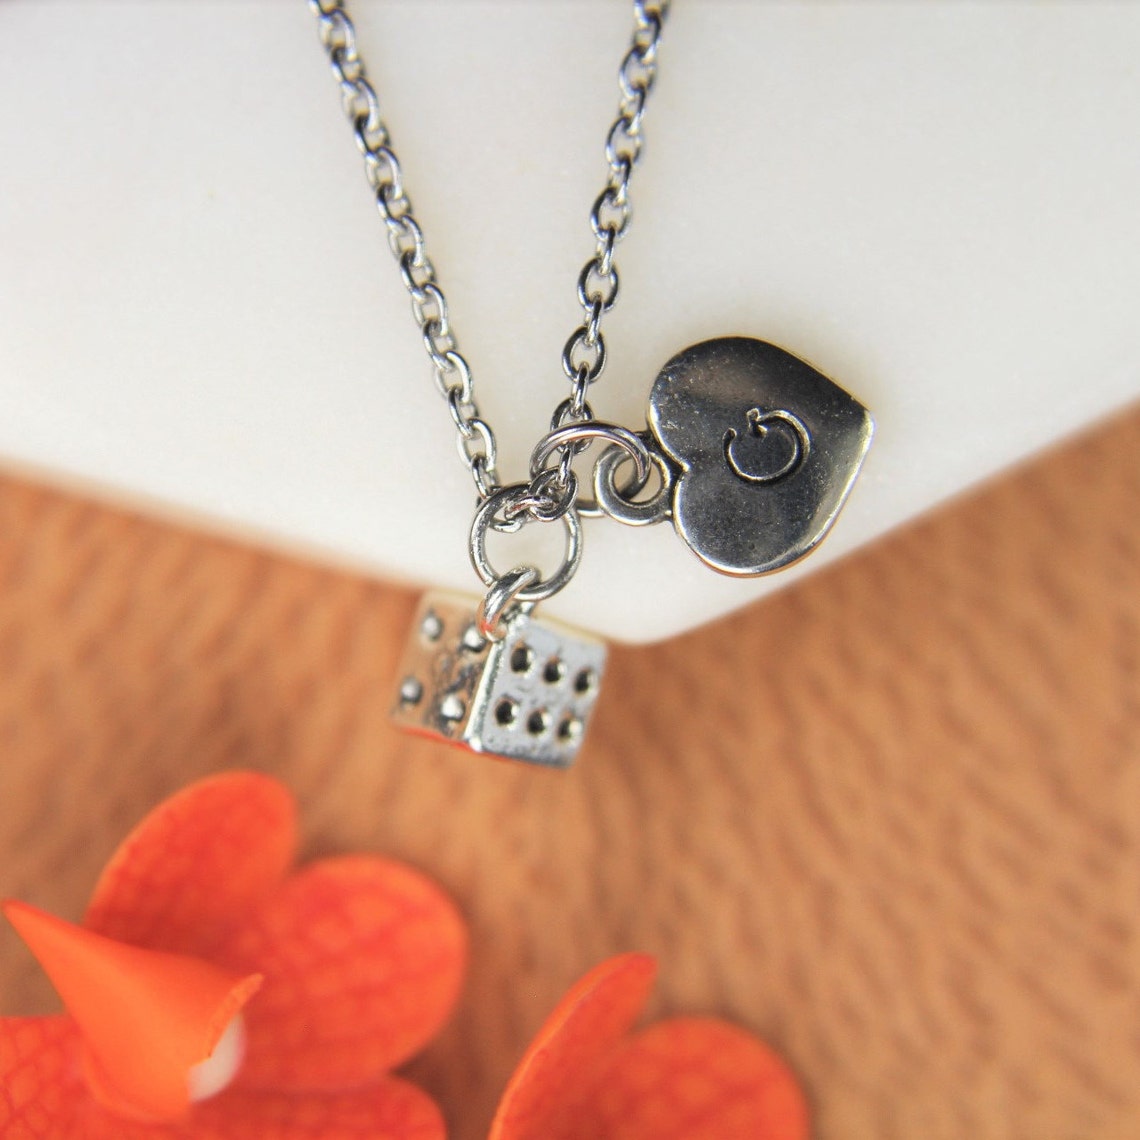 Dice Necklace Silver Dice Charm Necklace Gambling Pendant - Etsy